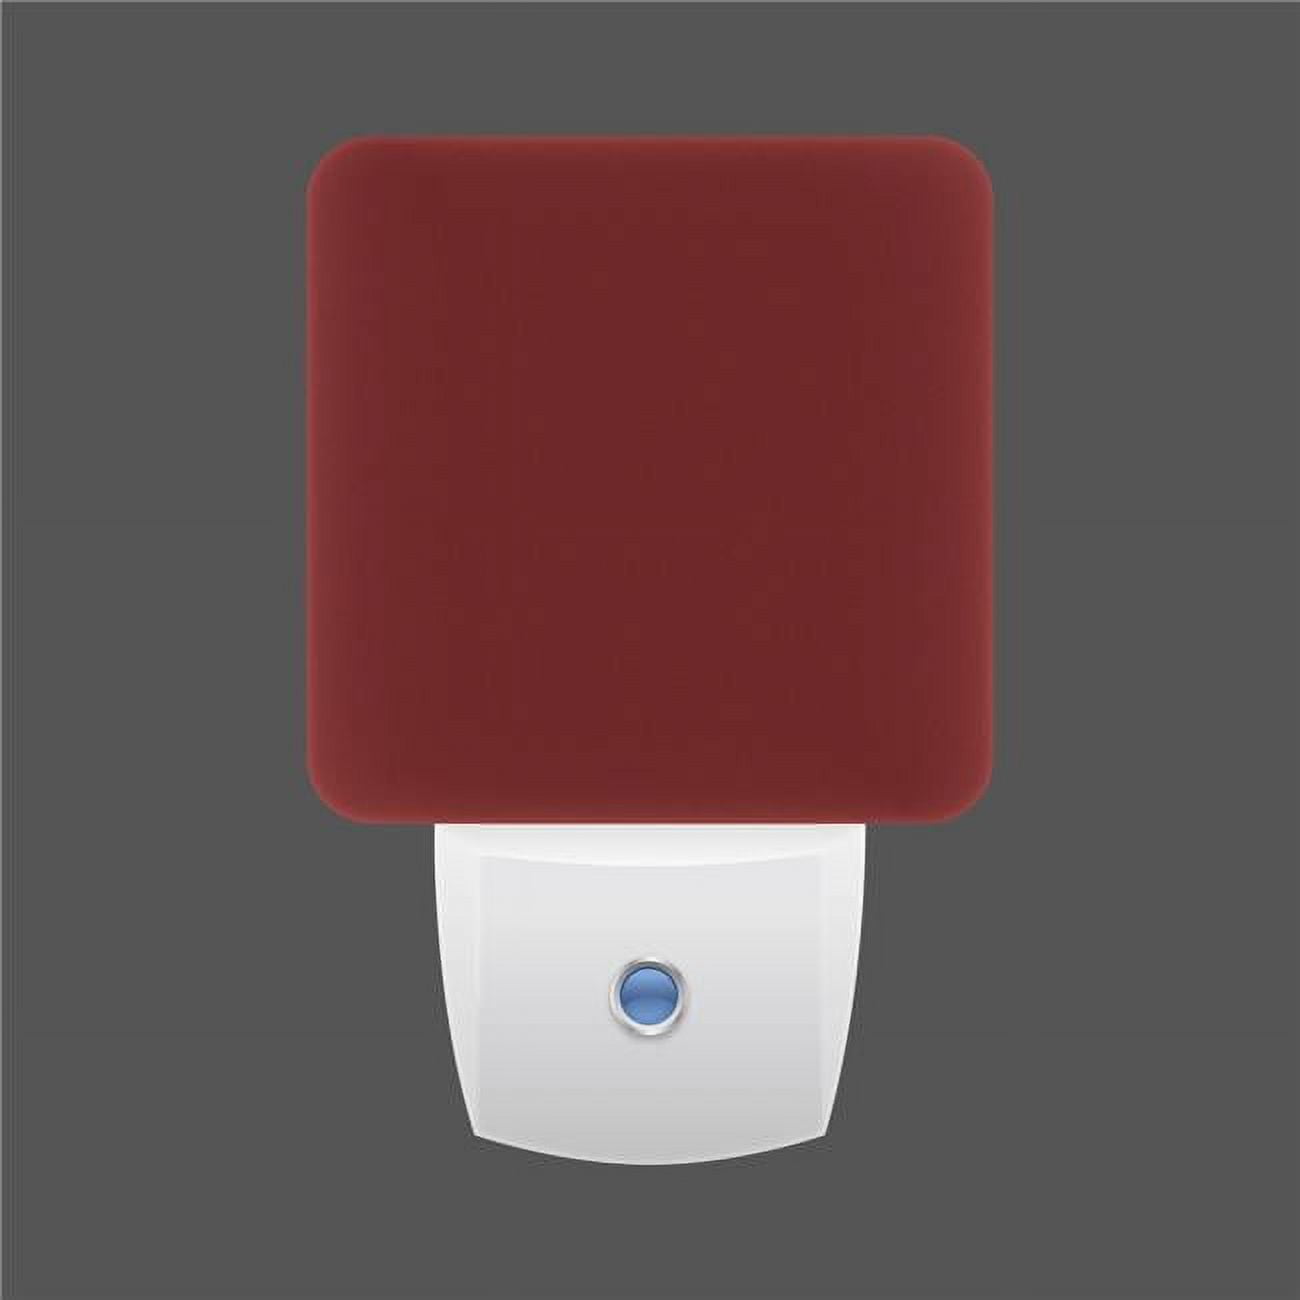 Picture of Borders Unlimited 40004 Red Sedona LED Night Light